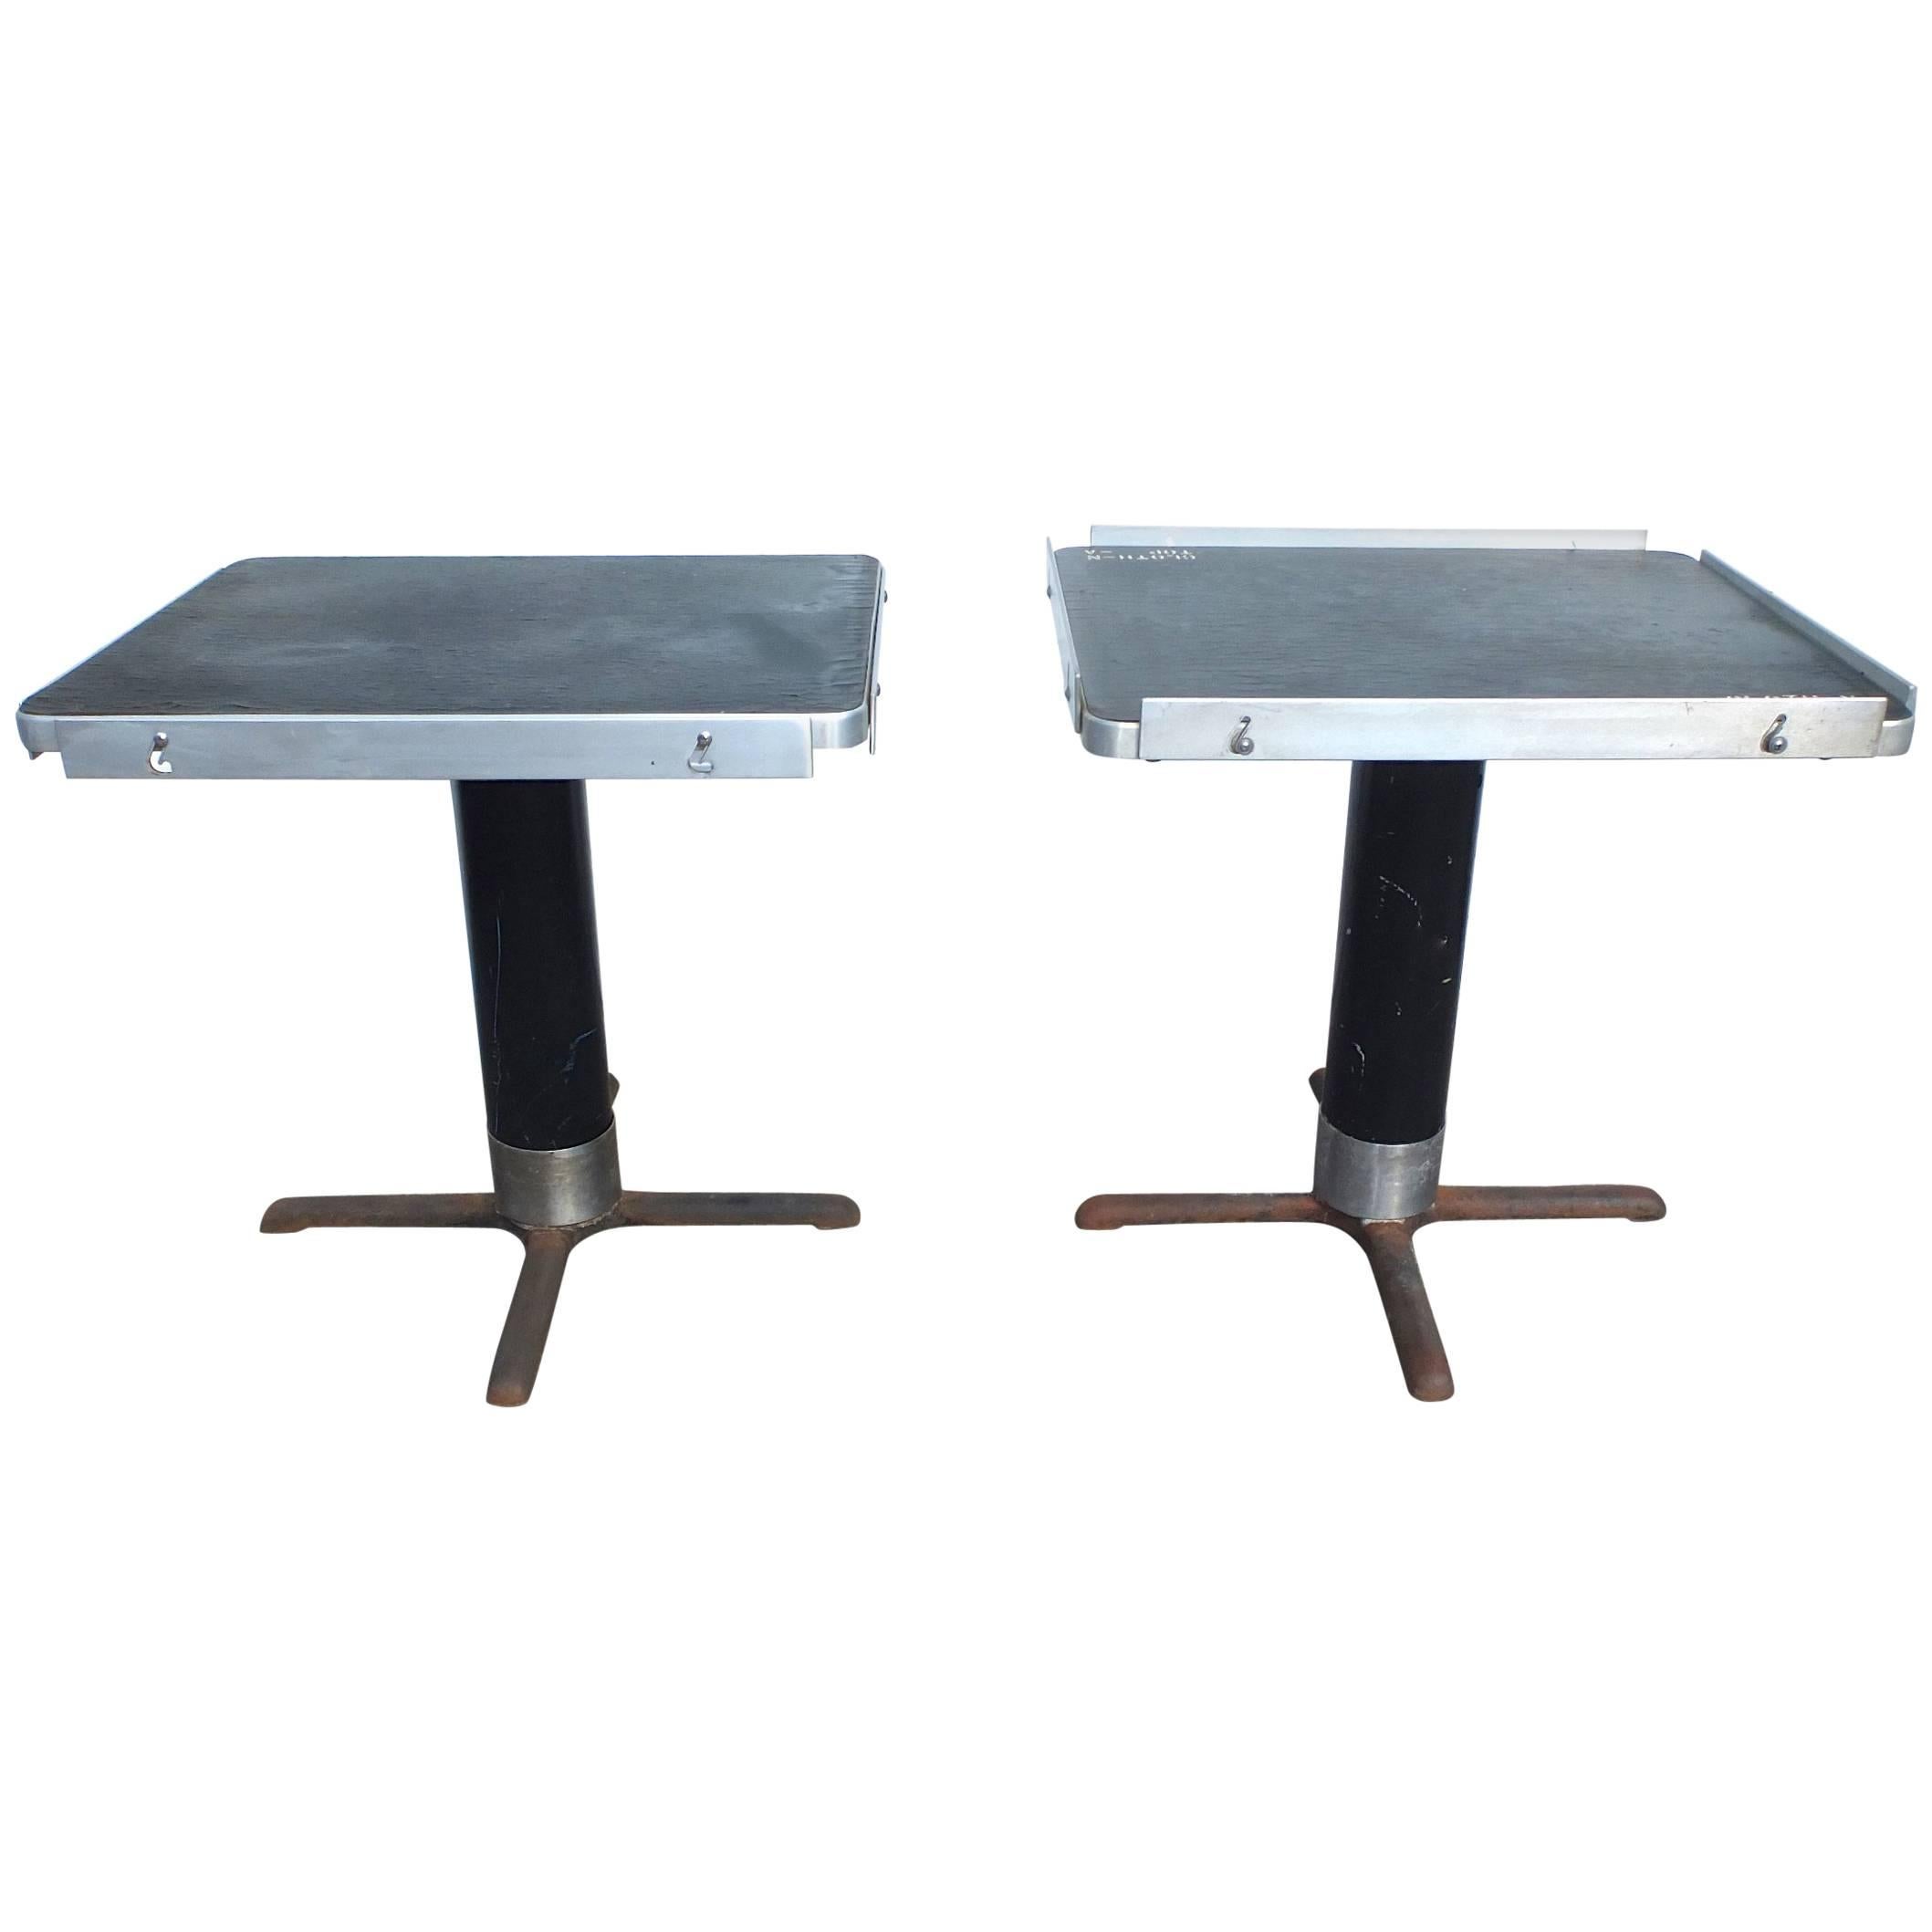 S.S. United States Rectangular Pedestal Dining Tables For Sale